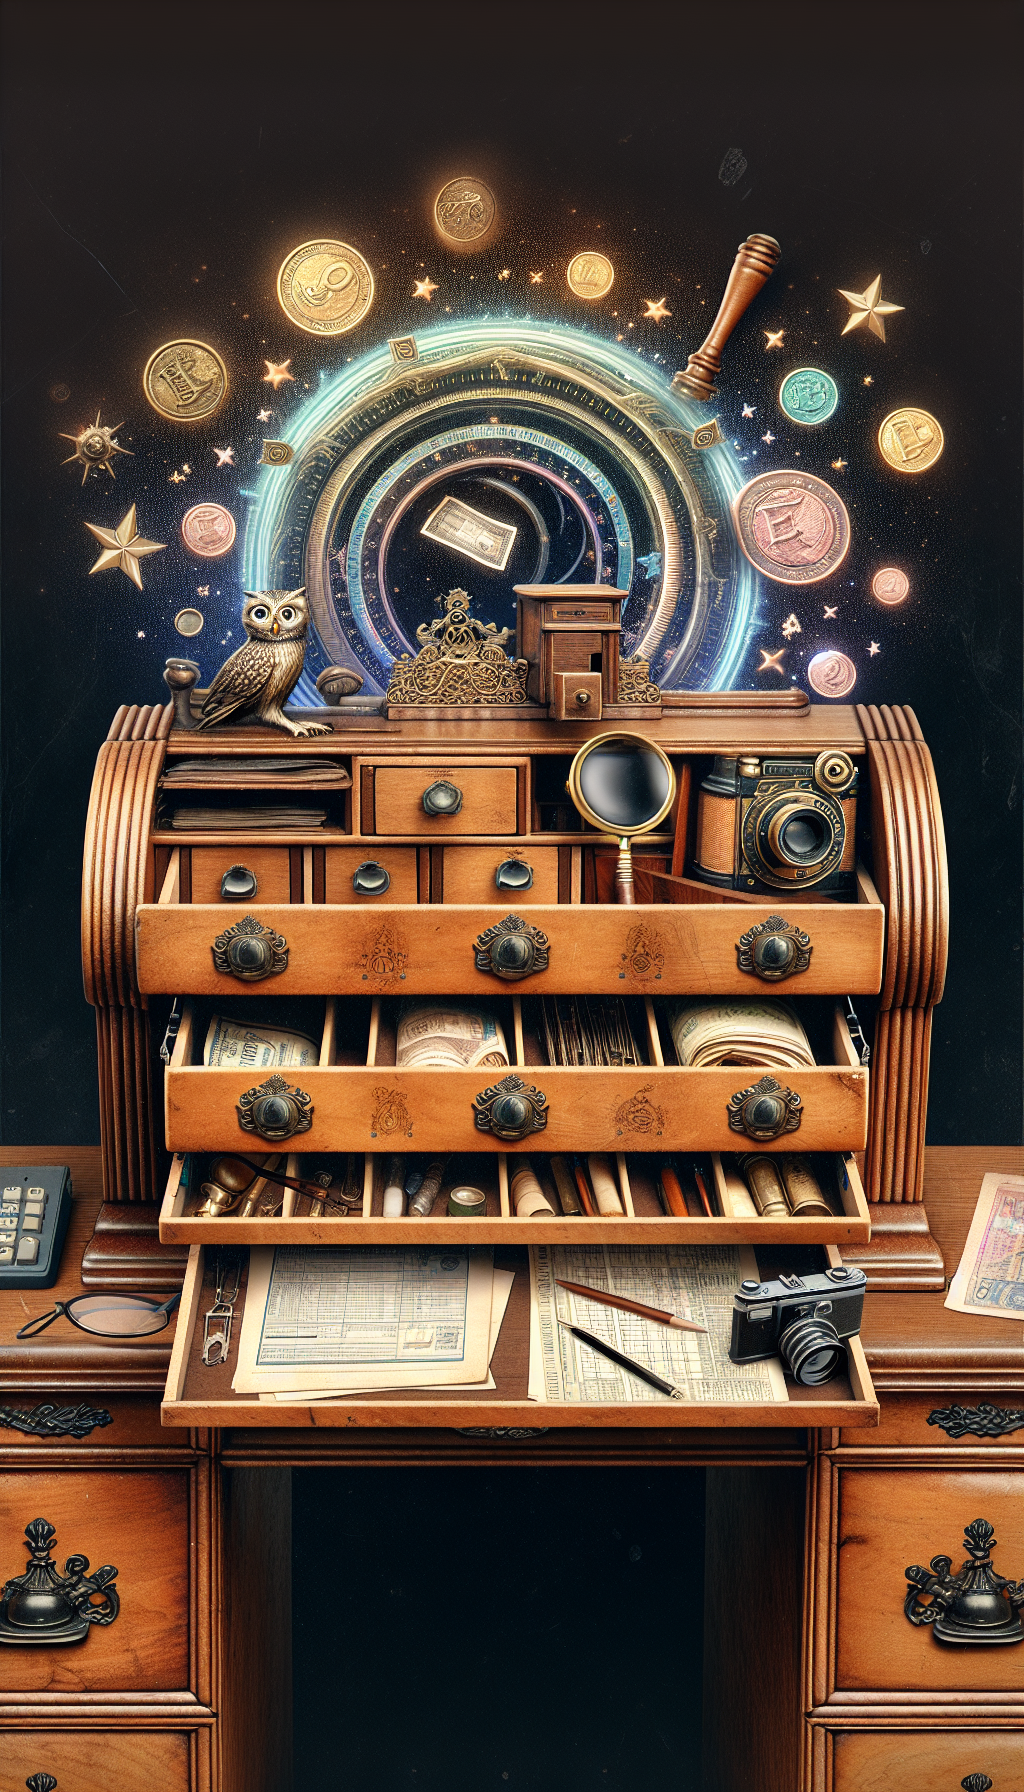 An illustration of an aged, wood-textured drop front secretary desk, with its compartments splayed open to reveal various antique appraisal tools like a magnifying glass, a vintage camera, and appraisal forms. A translucent overlay of stars and currency symbols hovers above the desk, symbolizing the desk's value assessment, while a wise owl wearing glasses perches atop, embodying wisdom and insight.